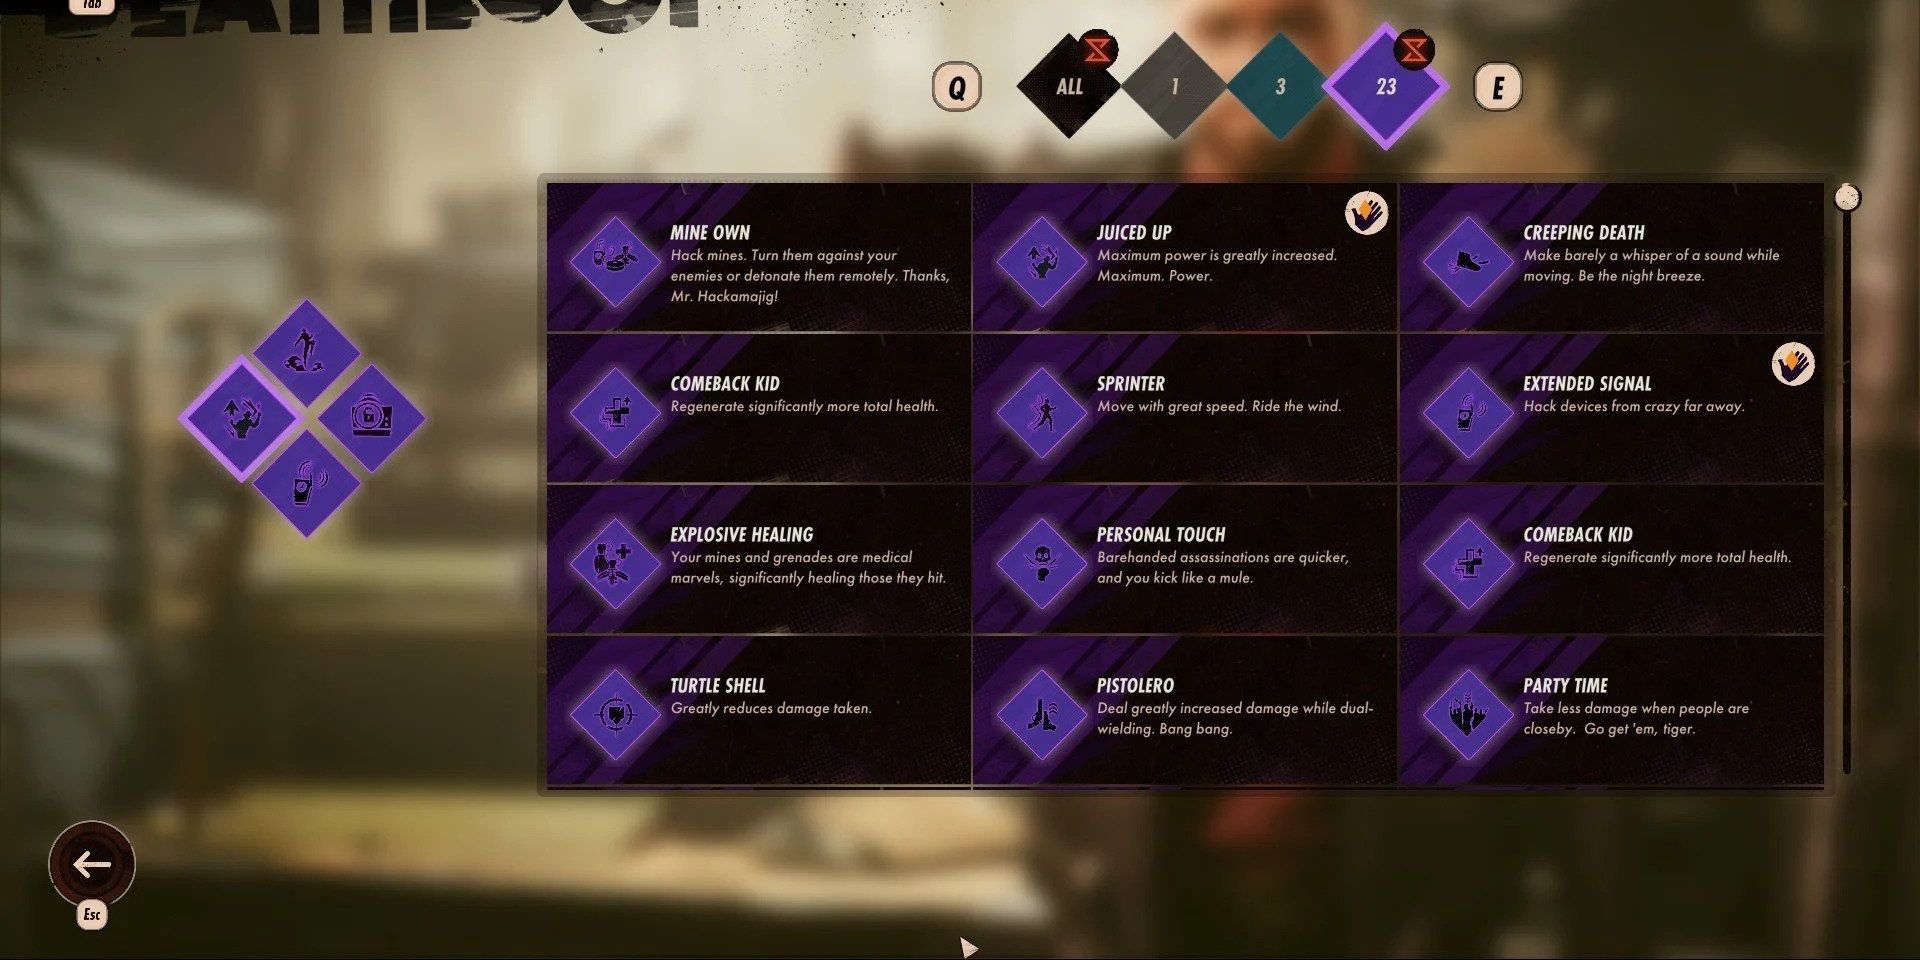 Character trinket selection screen in Deathloop including Personal Touch, Pistolero, and more